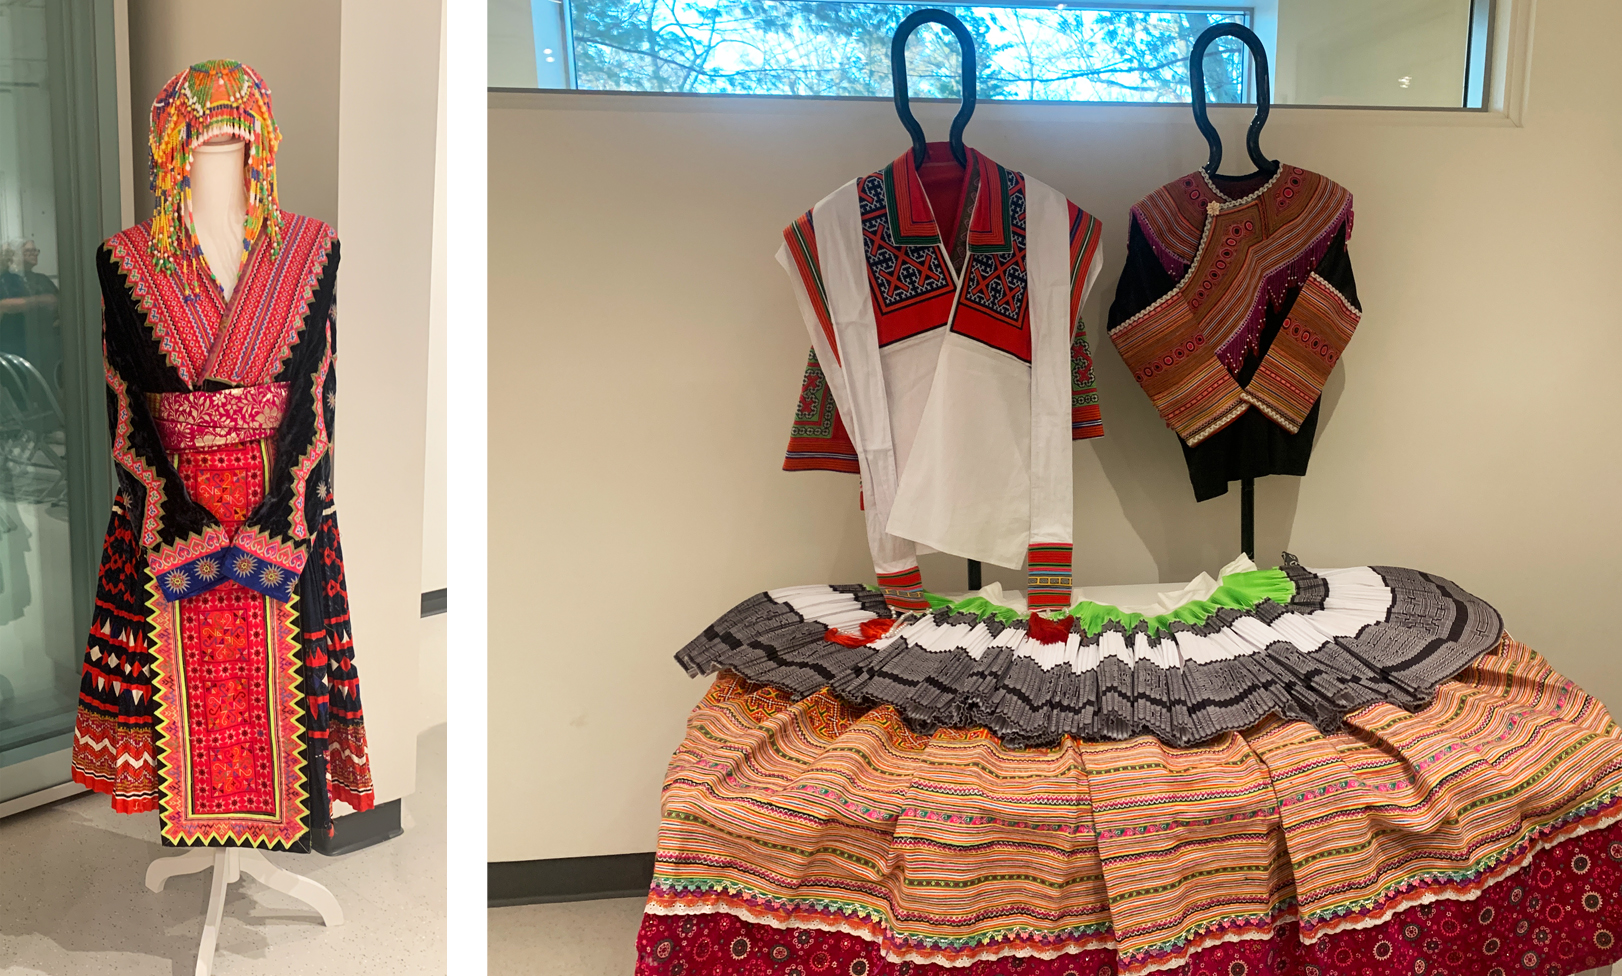 Three Hmong outfits are displayed on mannequins and are adorned with ornate colors, beadwork, and hand-stitched patterns.